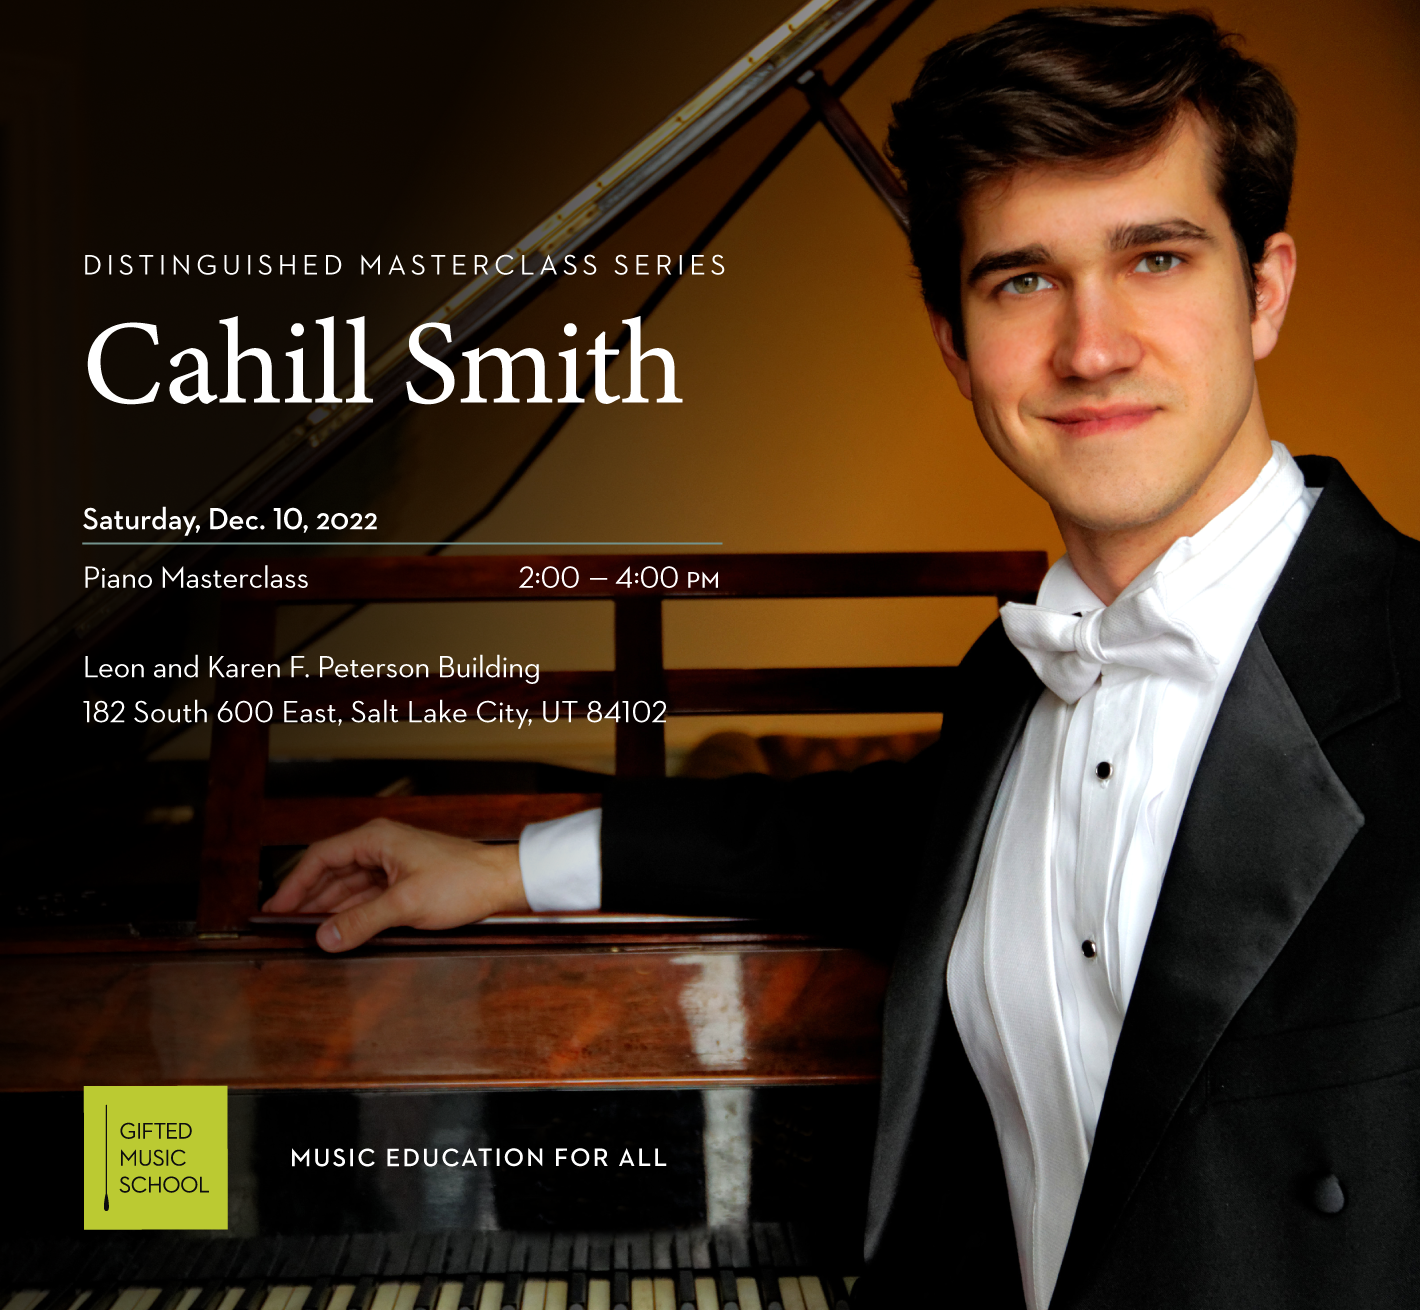 Cahill Smith teaches music Masterclass for Gifted Music School